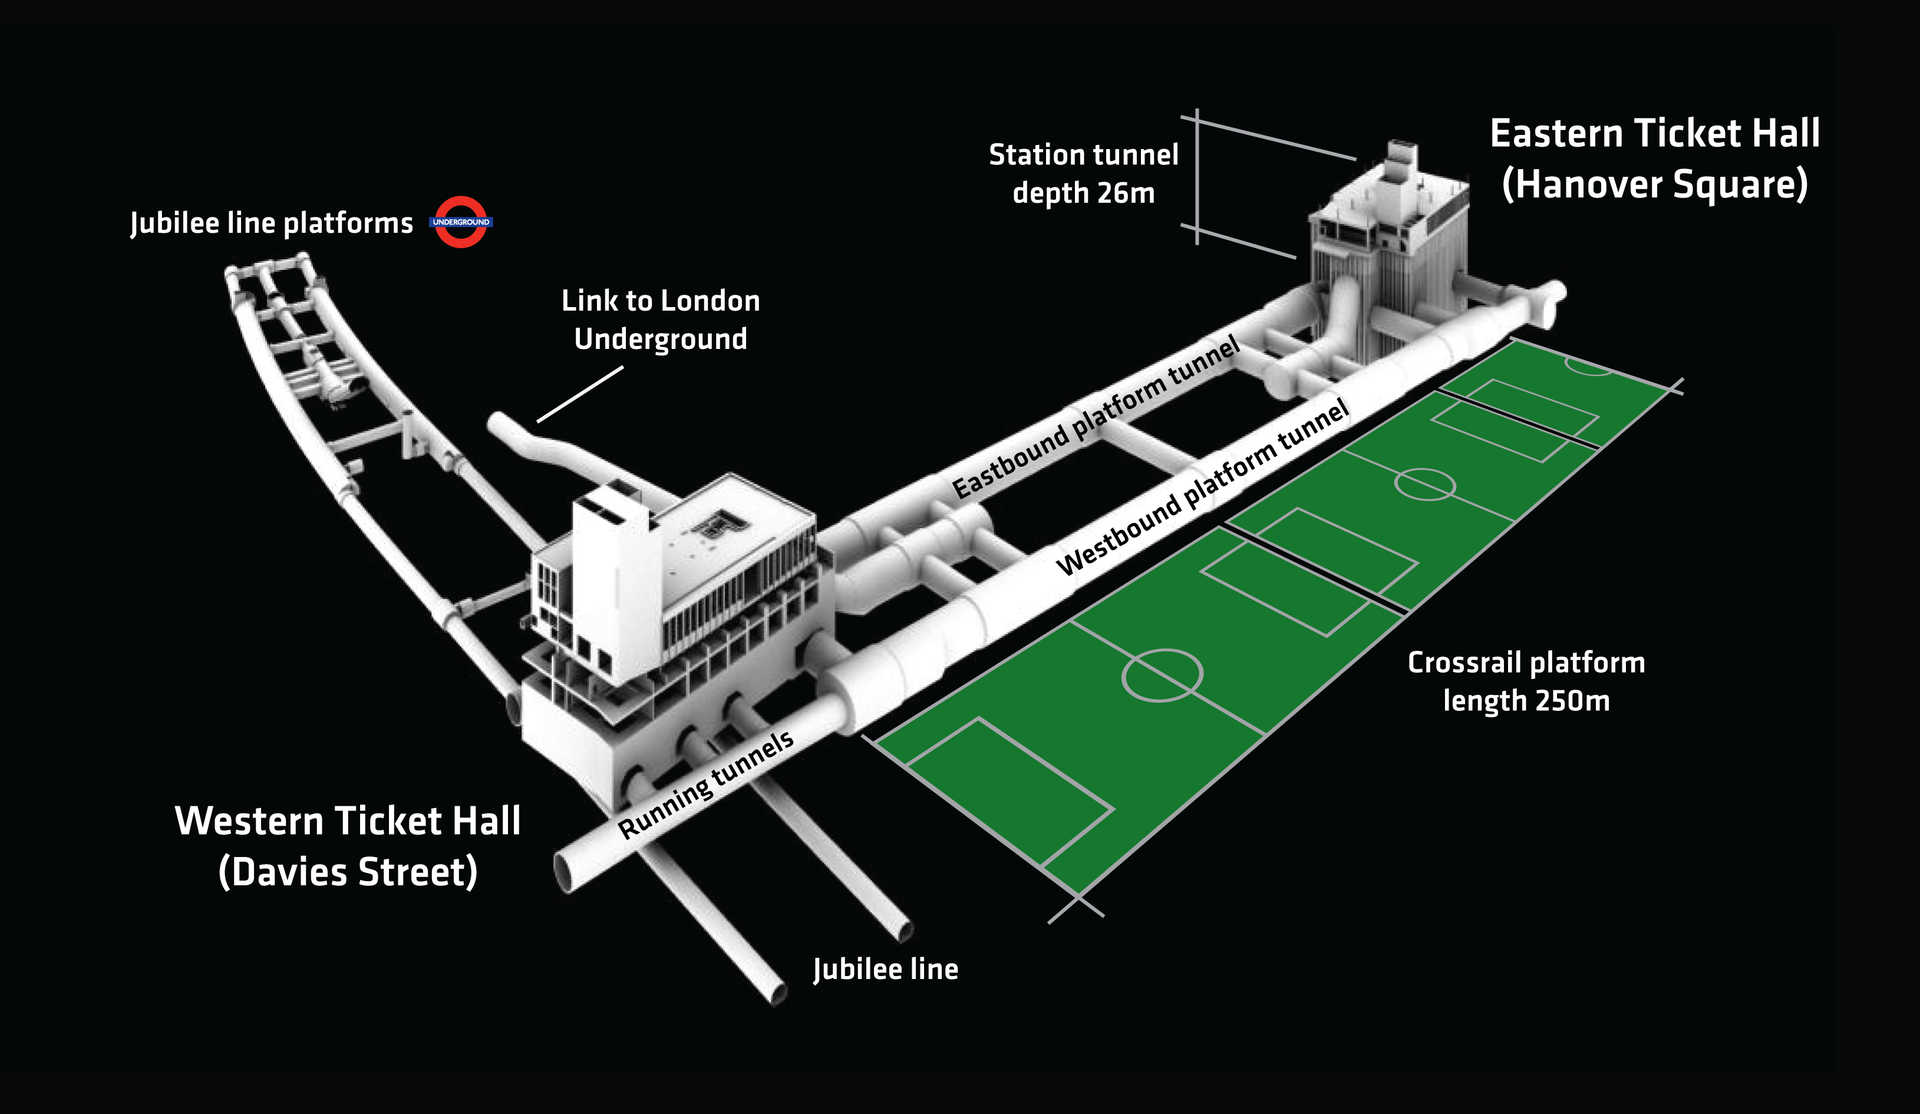 Bond-Street-station-annotated-diagram-of-station-structure_68614.jpg